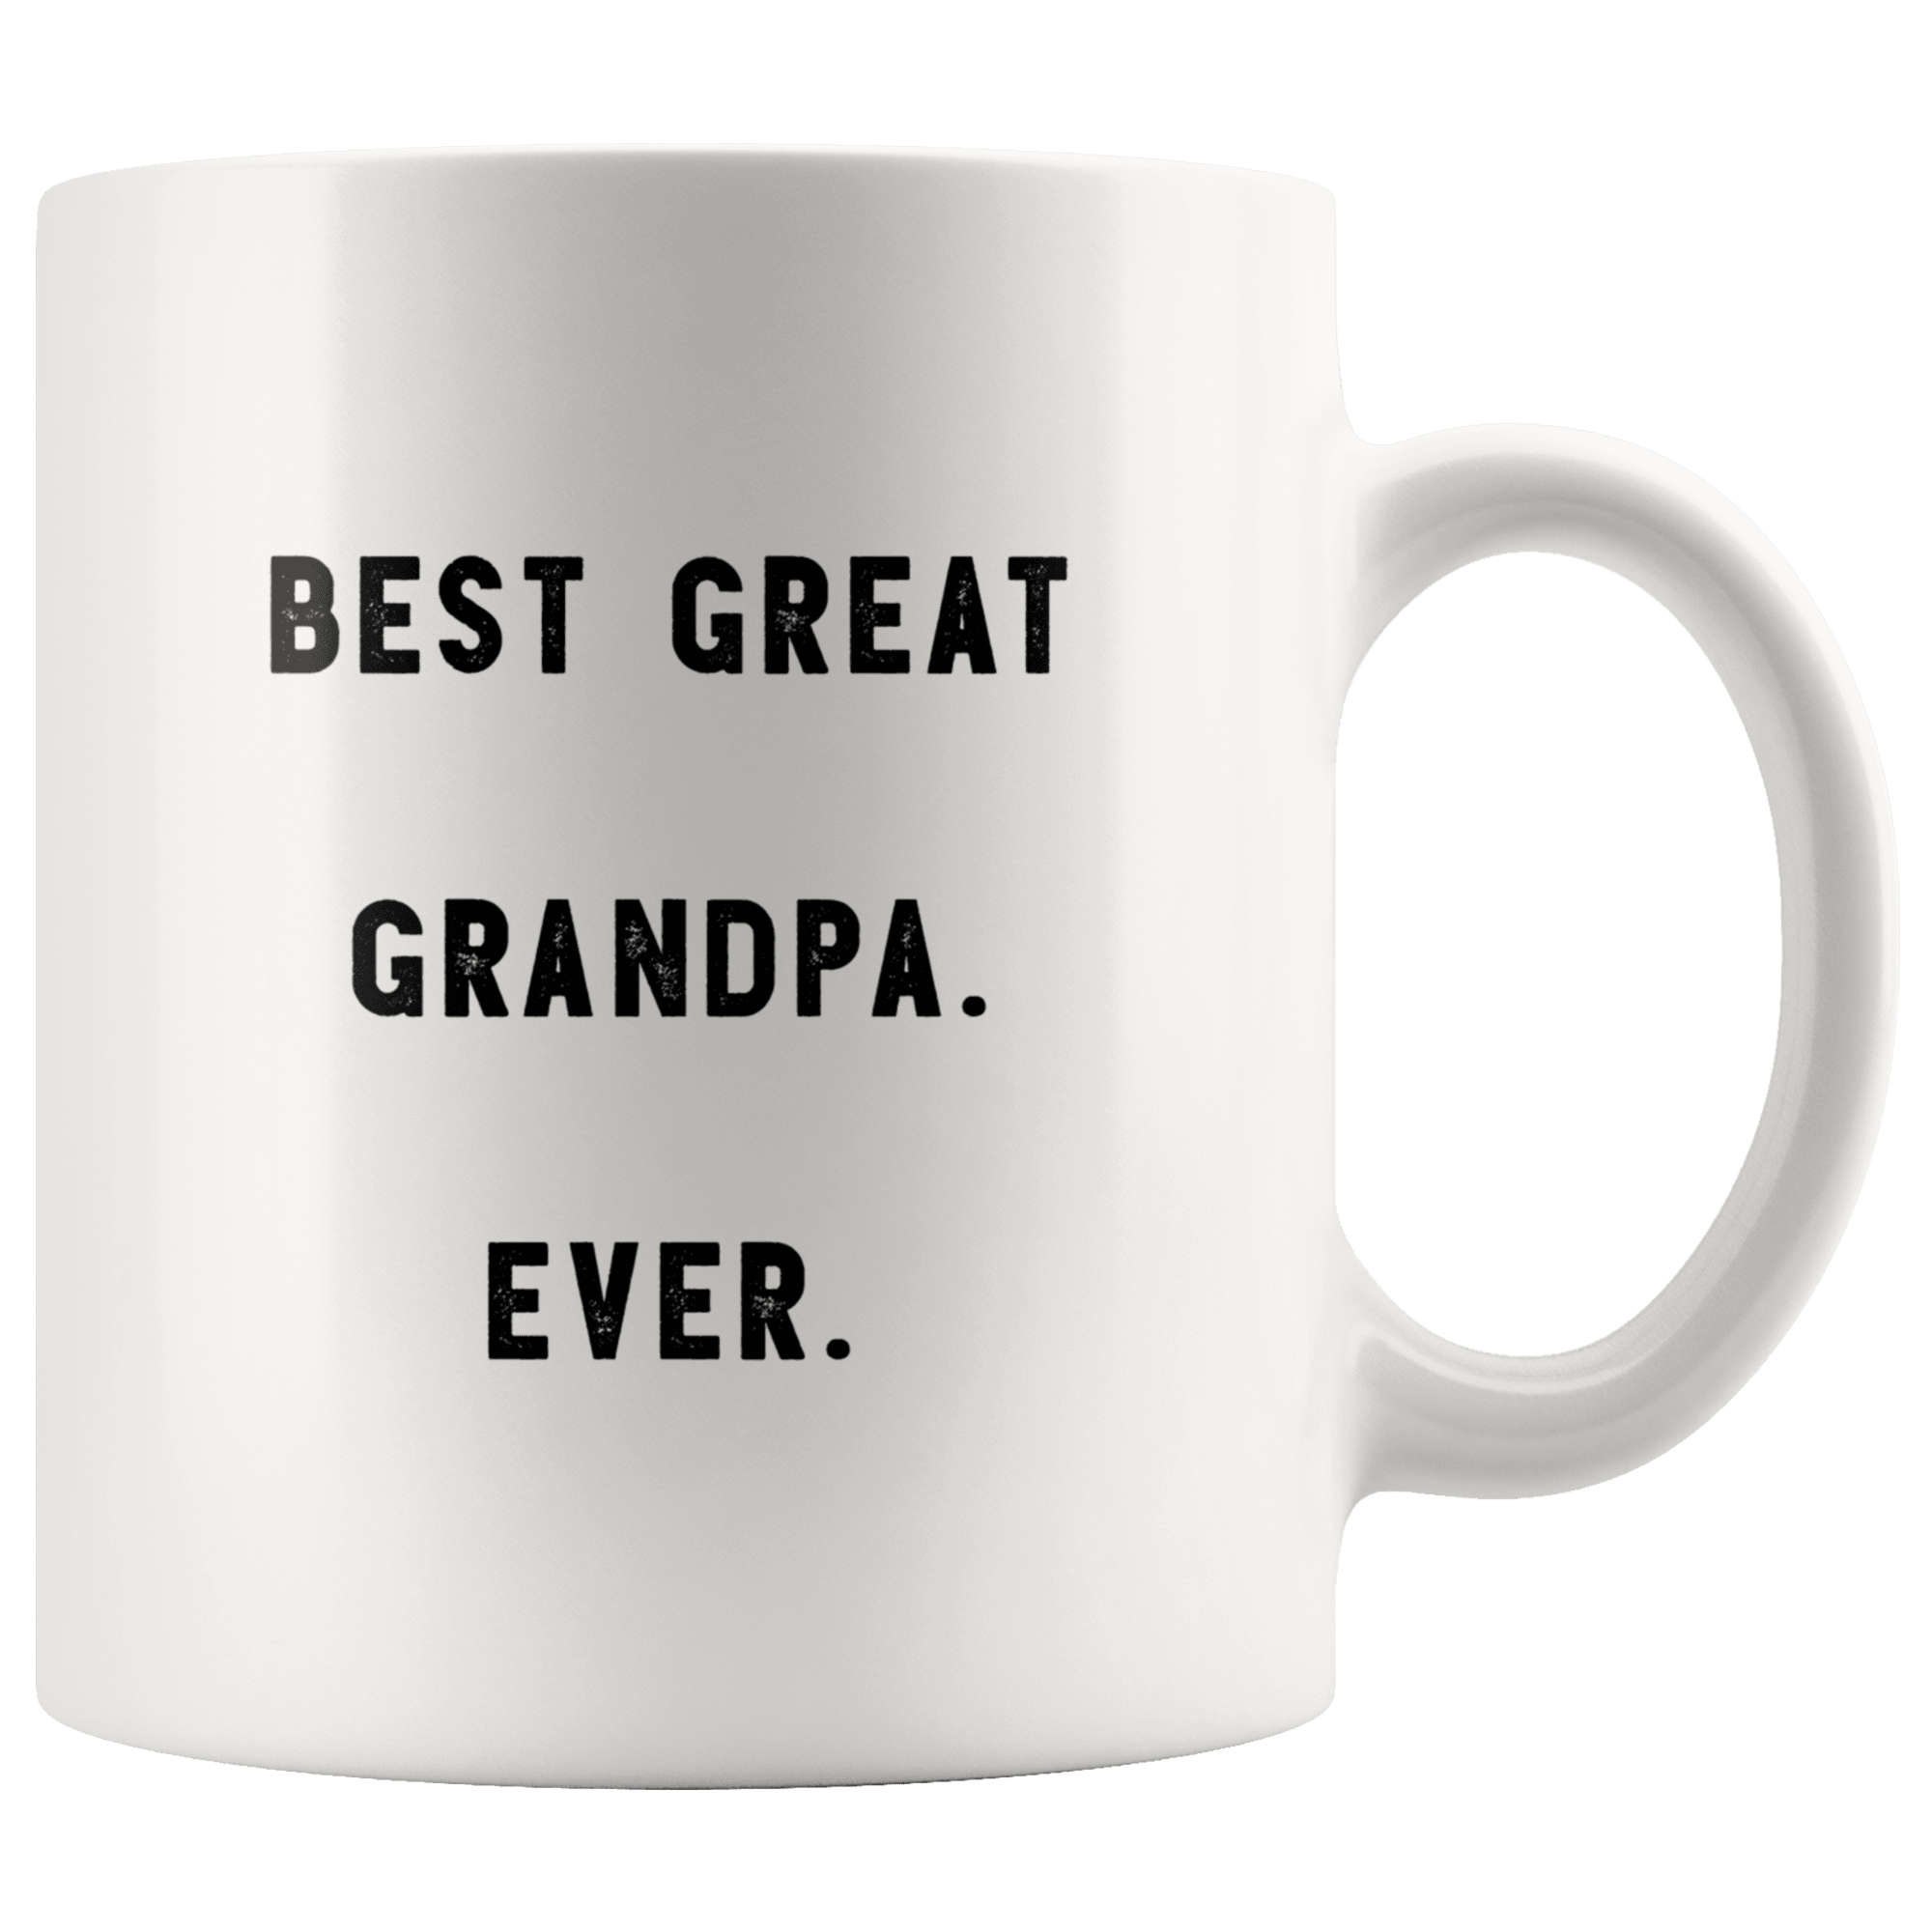 Best Great Grandpa. Ever. The Funny Coworker Office Gag Gifts